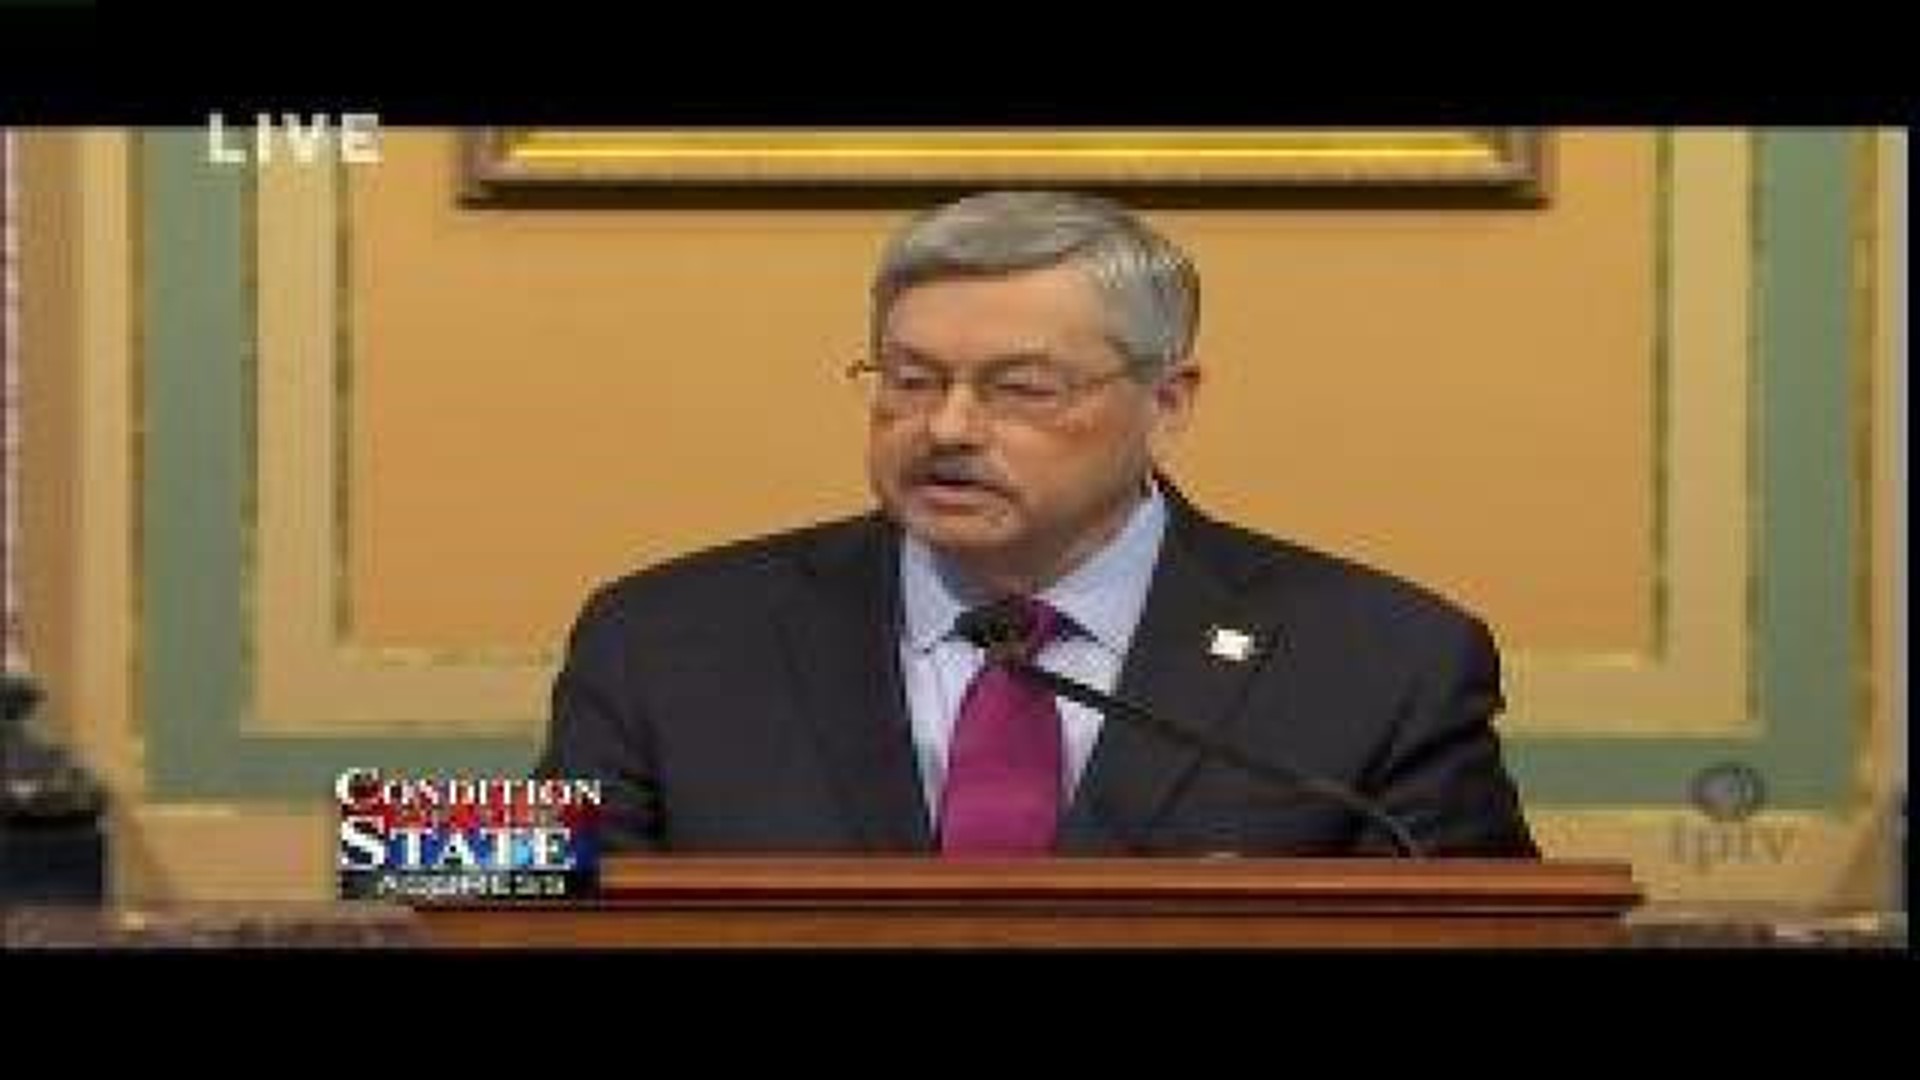 Gov Branstad 2014 Condition of the State - Part 1 of 2